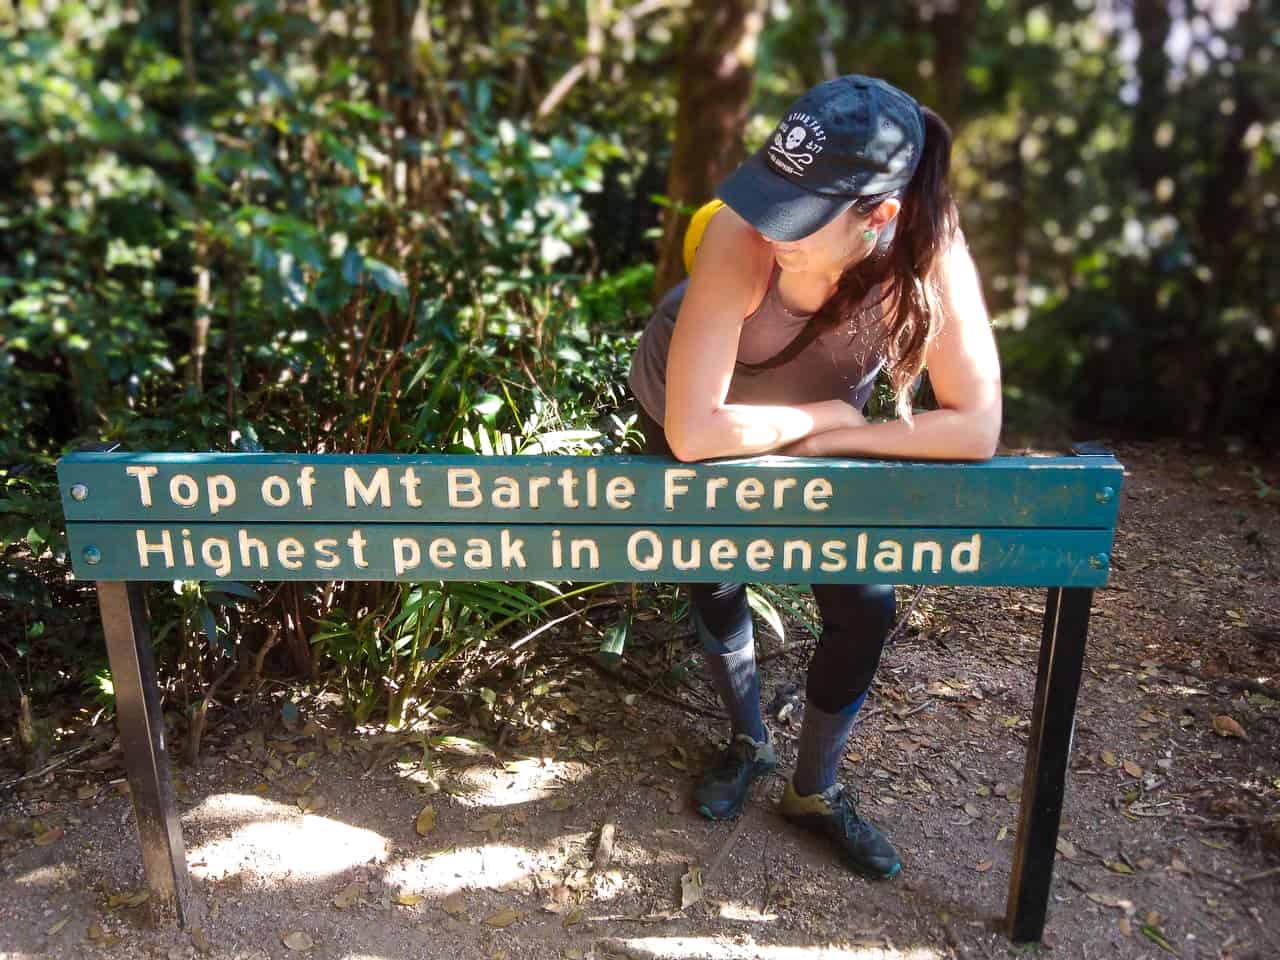 Standing at the Mount Bartle Frere summit sign, Australia // Travel Mermaid